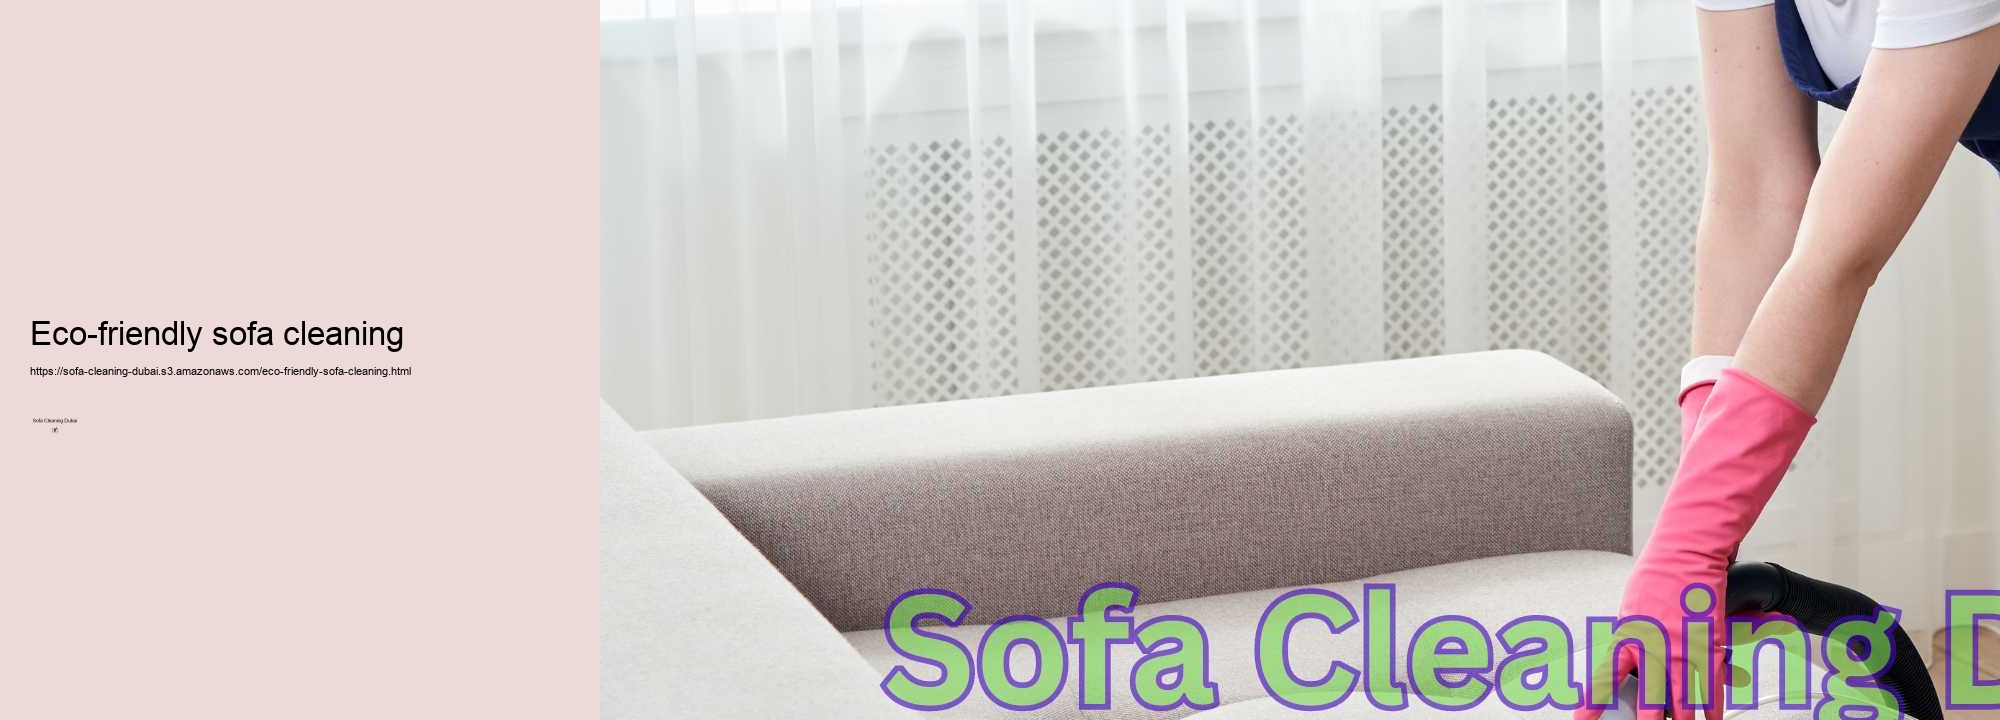 Eco-friendly sofa cleaning